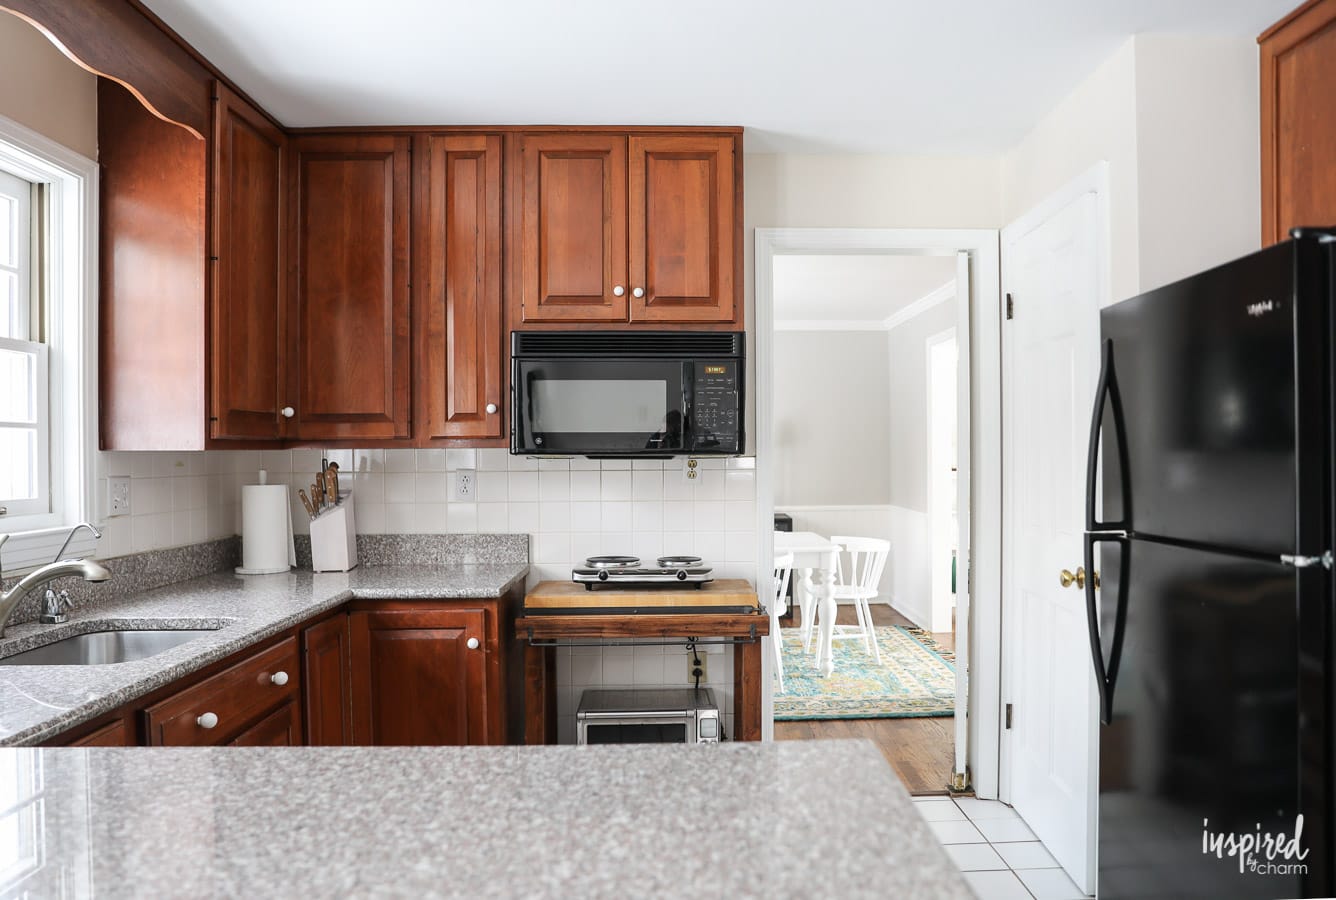 Kitchen Remodel: The Before - kitchen renovation from start to finish